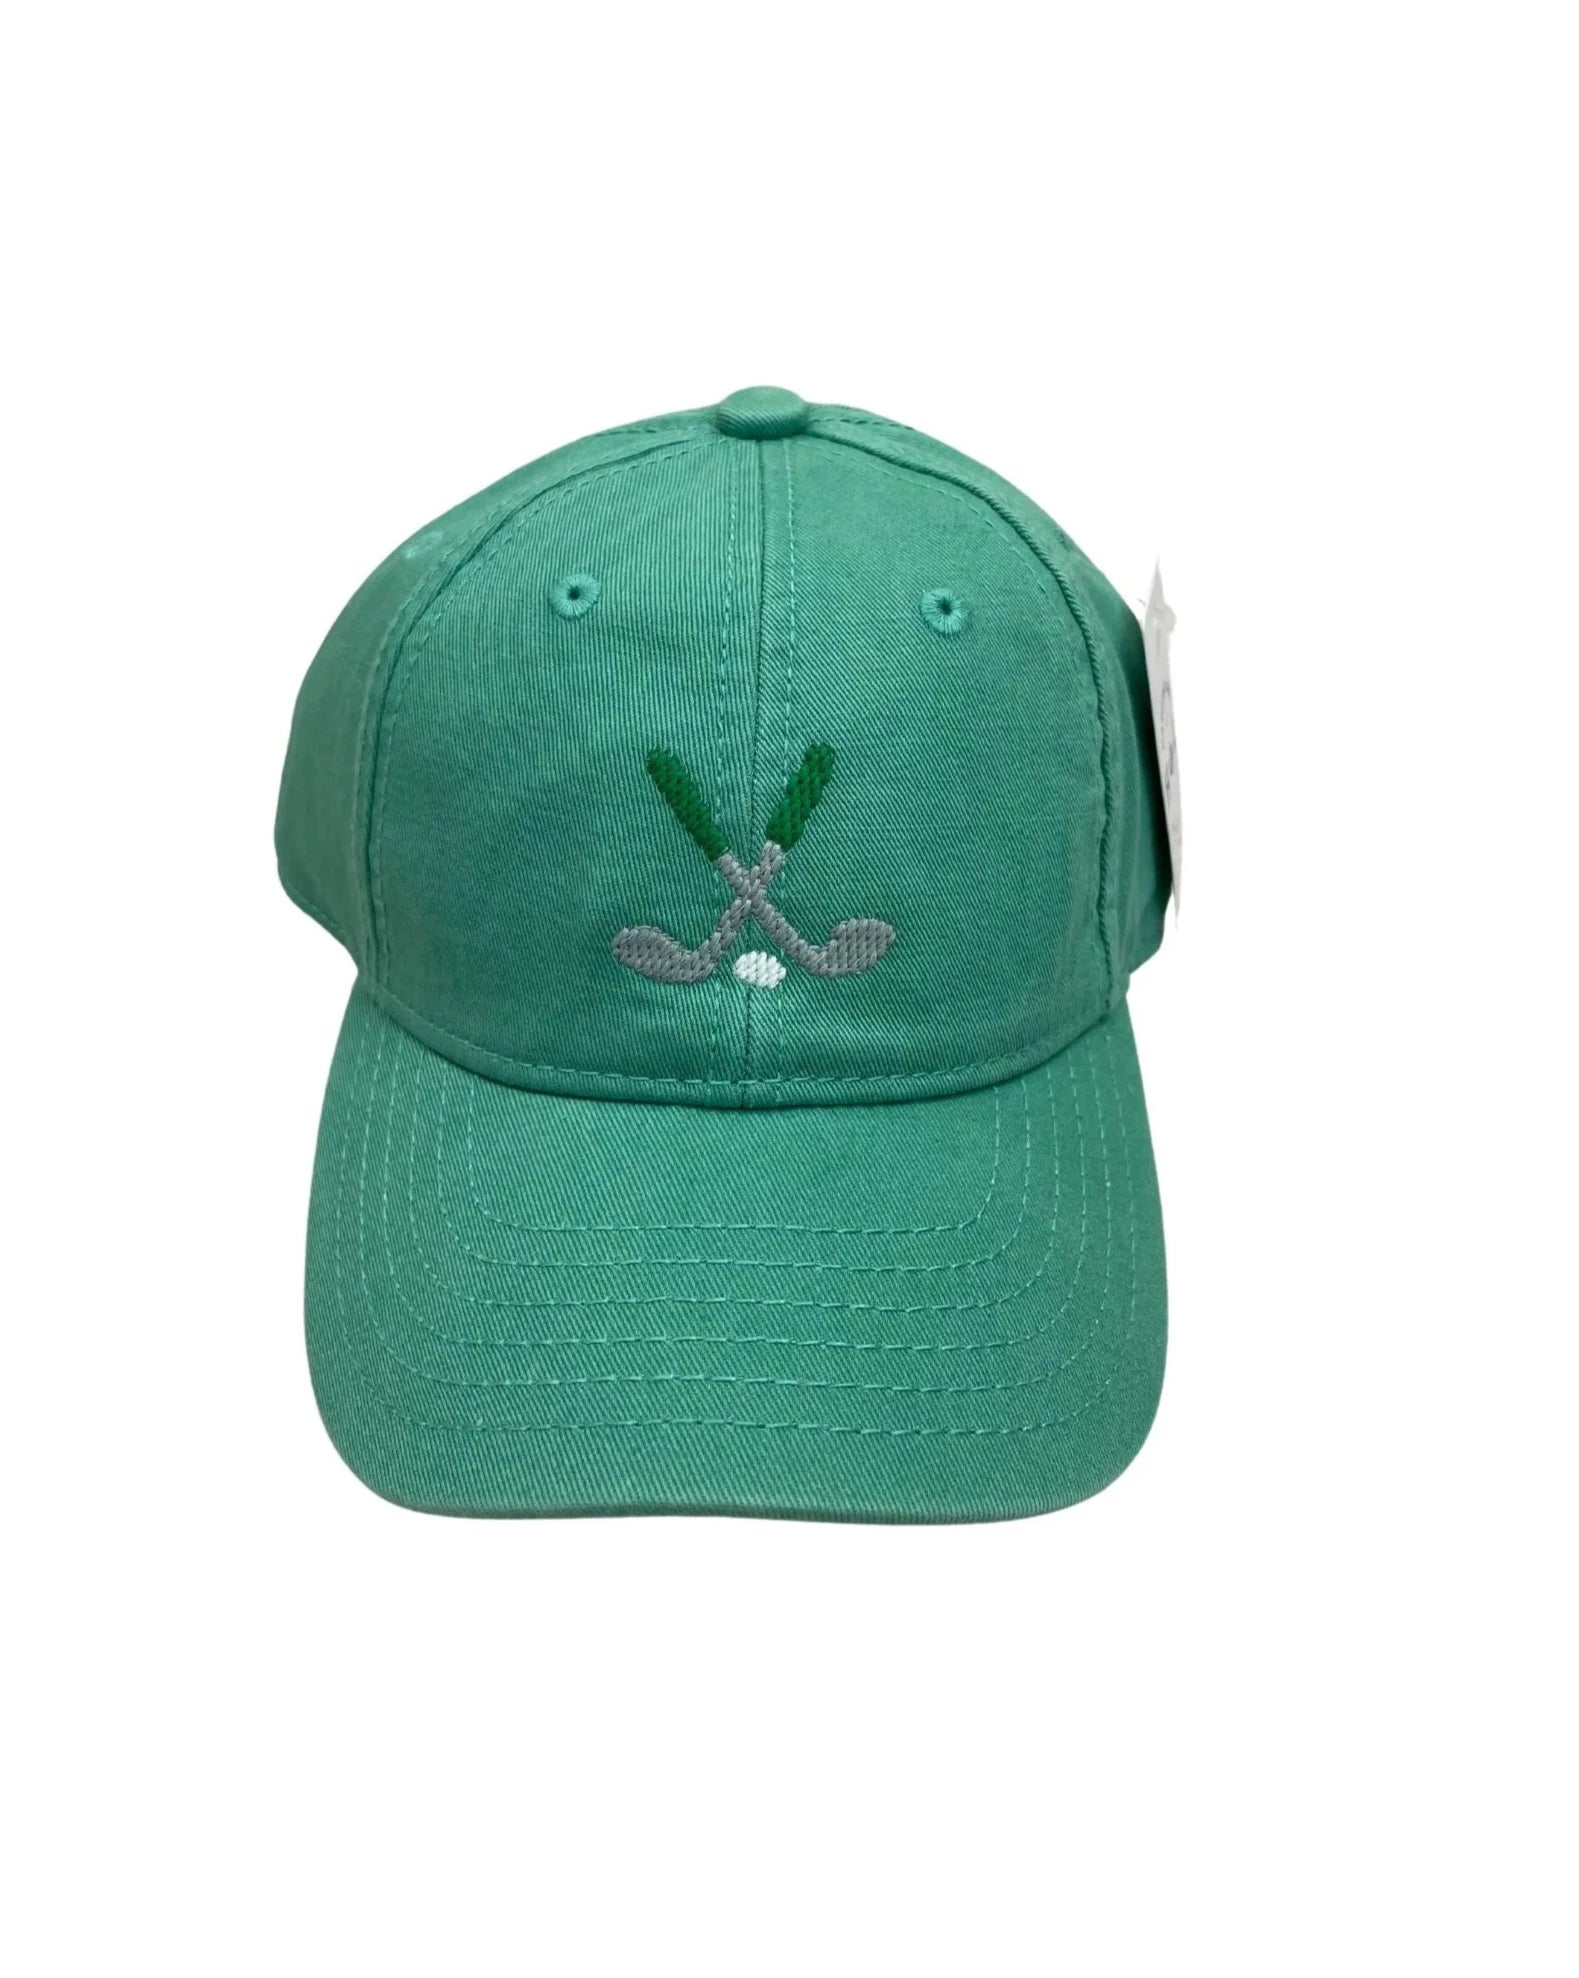 green hat with golf clubs